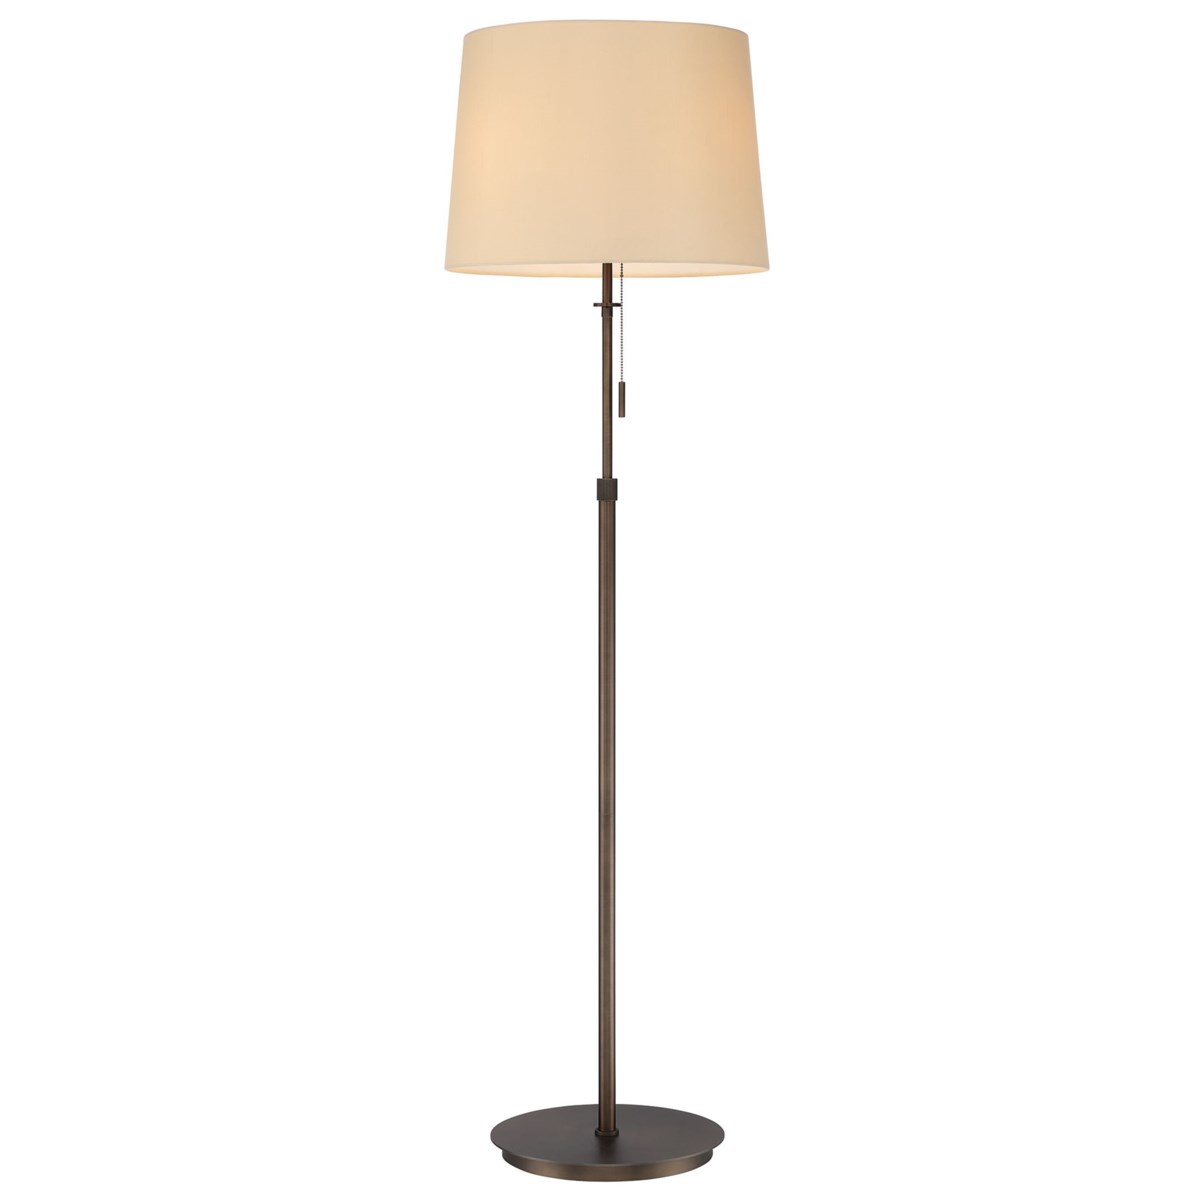 X3 Floor Lamp in Bronze with White Shade